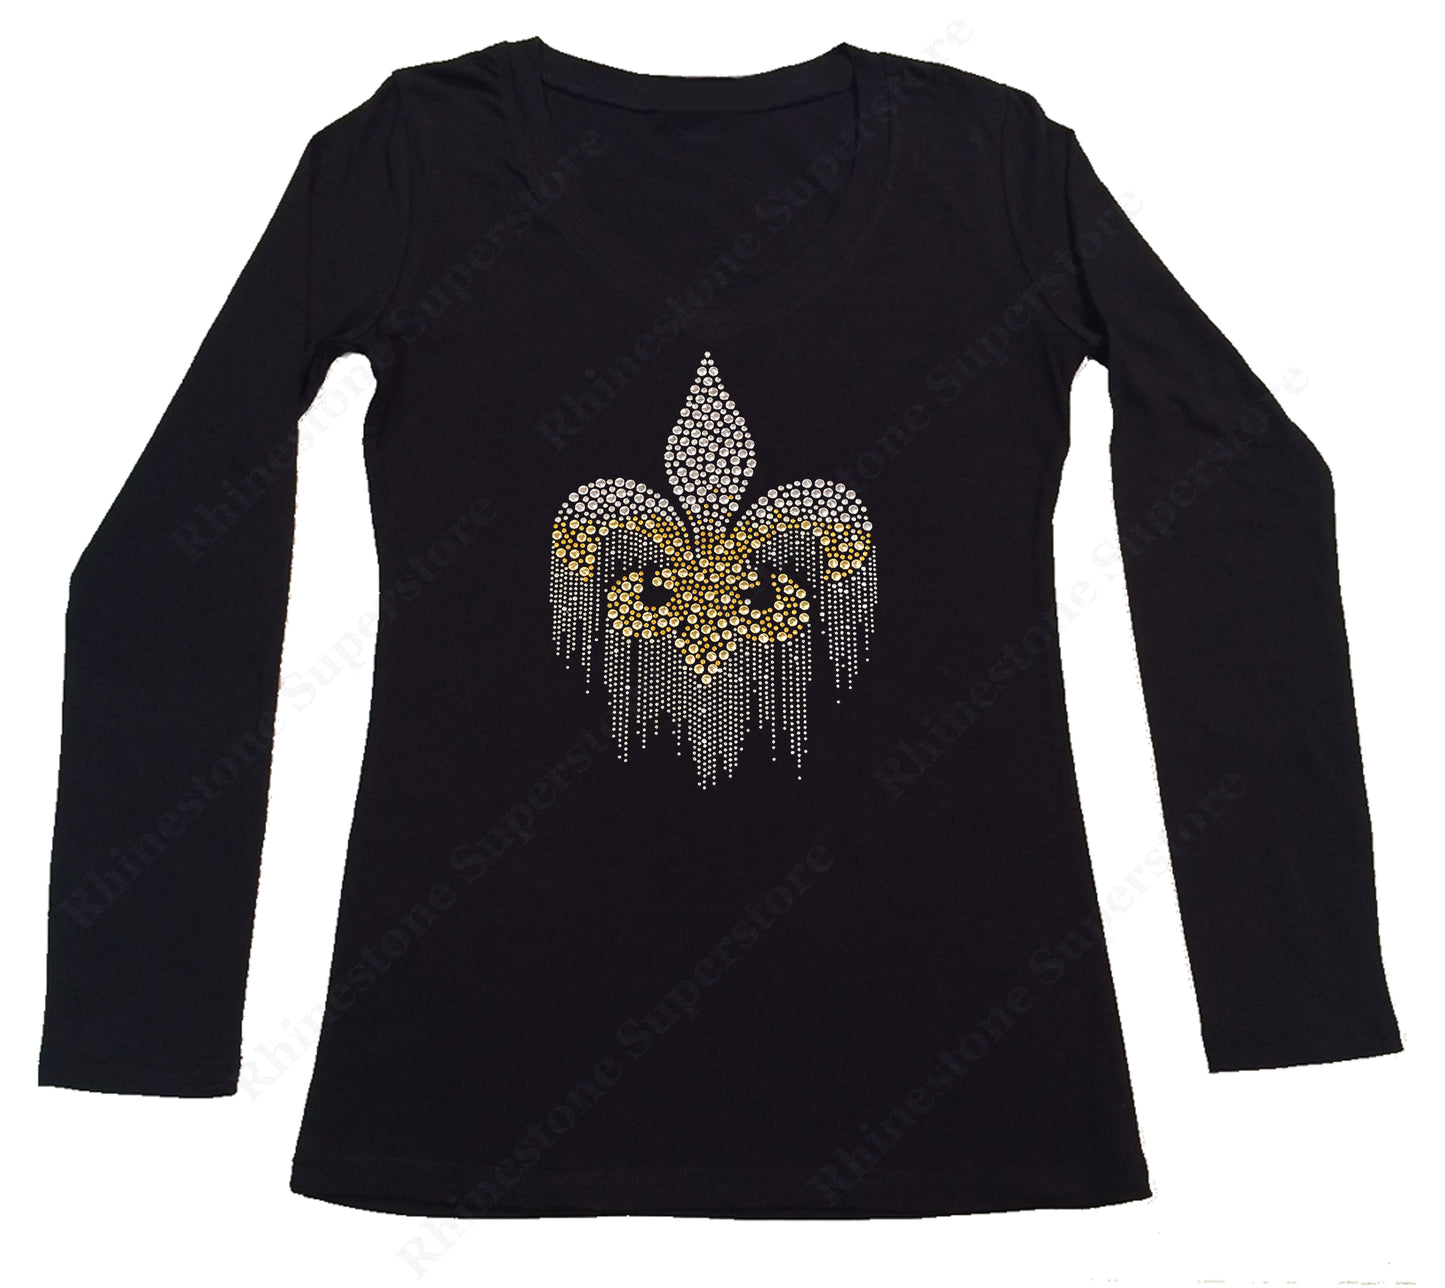 Womens T-shirt with Fluer de Lis Dripping in Silver and Gold Rhinestuds